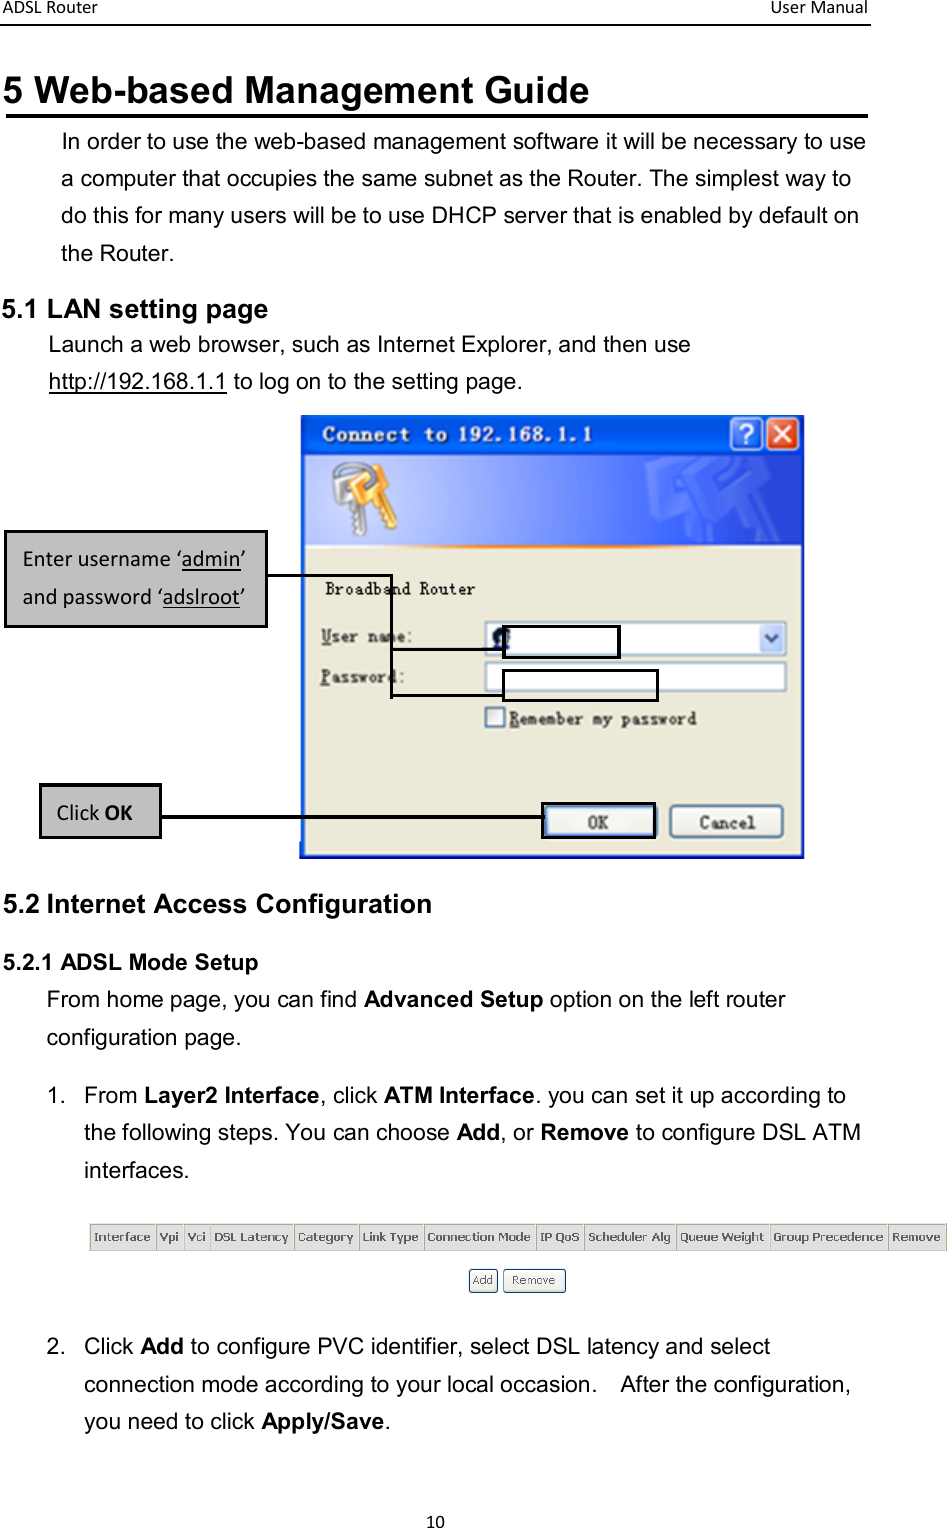 ADSL Router       User Manual 10 5 Web-based Management Guide In order to use the web-based management software it will be necessary to use a computer that occupies the same subnet as the Router. The simplest way to do this for many users will be to use DHCP server that is enabled by default on the Router. 5.1 LAN setting page Launch a web browser, such as Internet Explorer, and then use http://192.168.1.1 to log on to the setting page.      5.2 Internet Access Configuration 5.2.1 ADSL Mode Setup From home page, you can find Advanced Setup option on the left router configuration page. 1.  From Layer2 Interface, click ATM Interface. you can set it up according to the following steps. You can choose Add, or Remove to configure DSL ATM interfaces.  2.  Click Add to configure PVC identifier, select DSL latency and select connection mode according to your local occasion.    After the configuration, you need to click Apply/Save. Click OK Enter username ‘admin’ and password ‘adslroot’ 